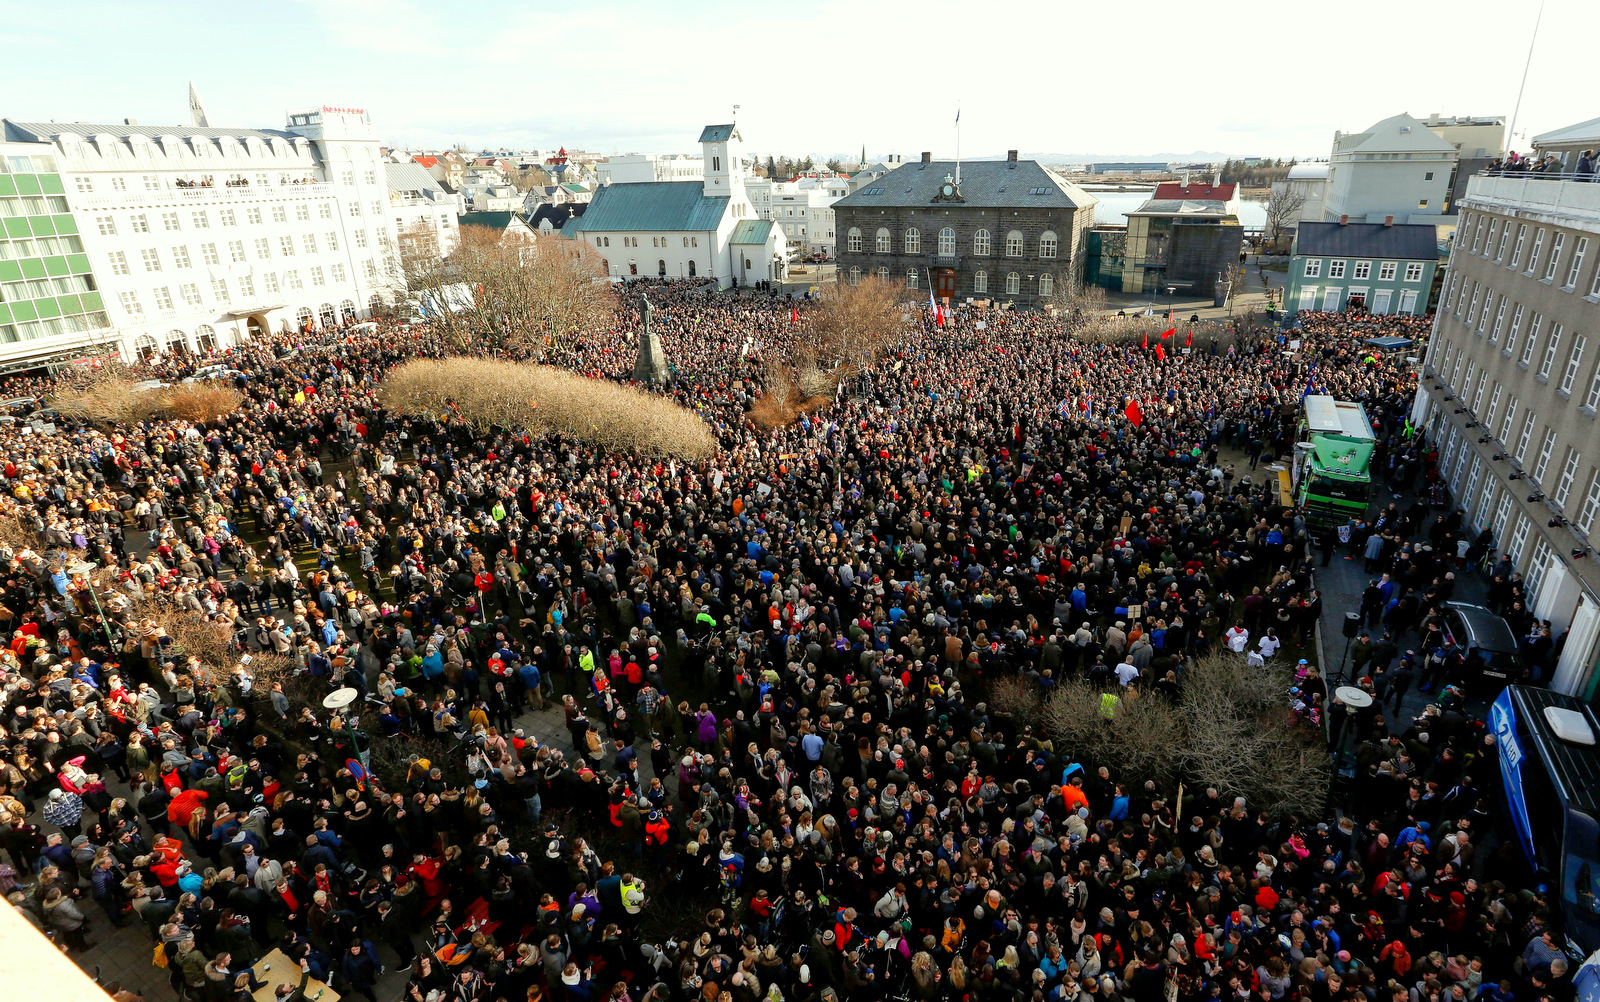 People who gather to demonstrate against Iceland's prime minister after allegations of corruption surfaced following the release of the Panama Papers, in Reykjavik. (AP/Brynjar Gunnarsson)